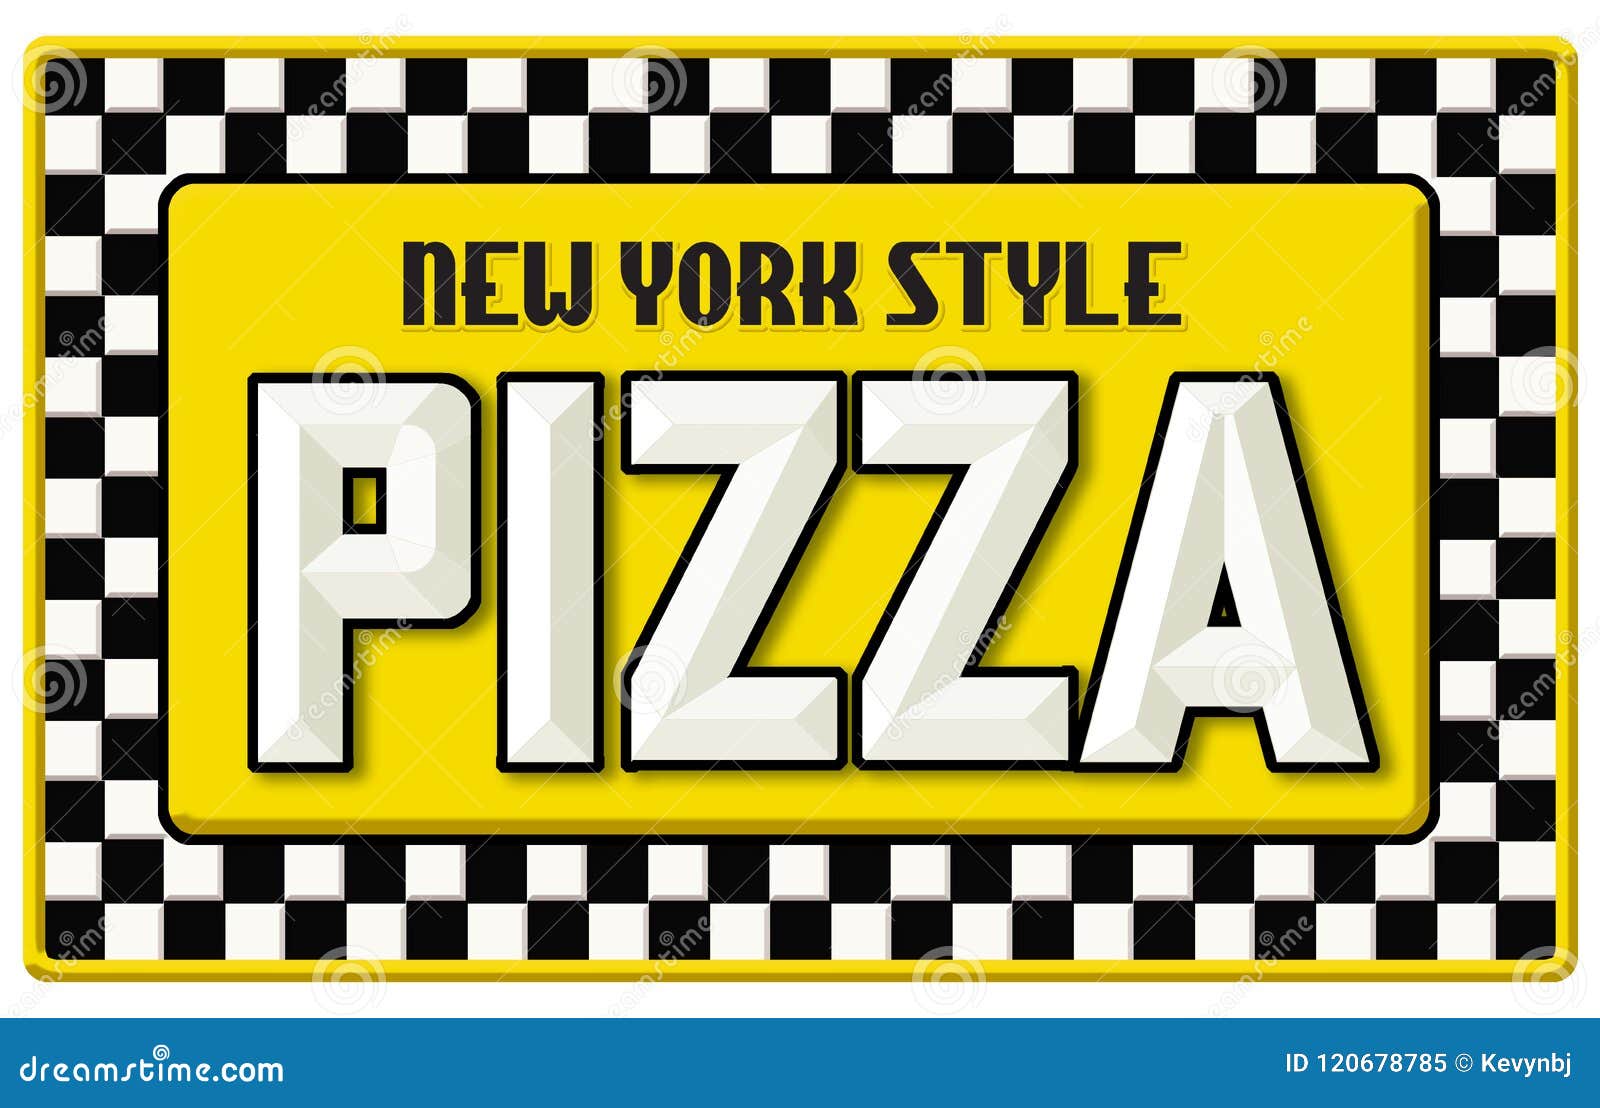 new york style pizza sign tin embossed